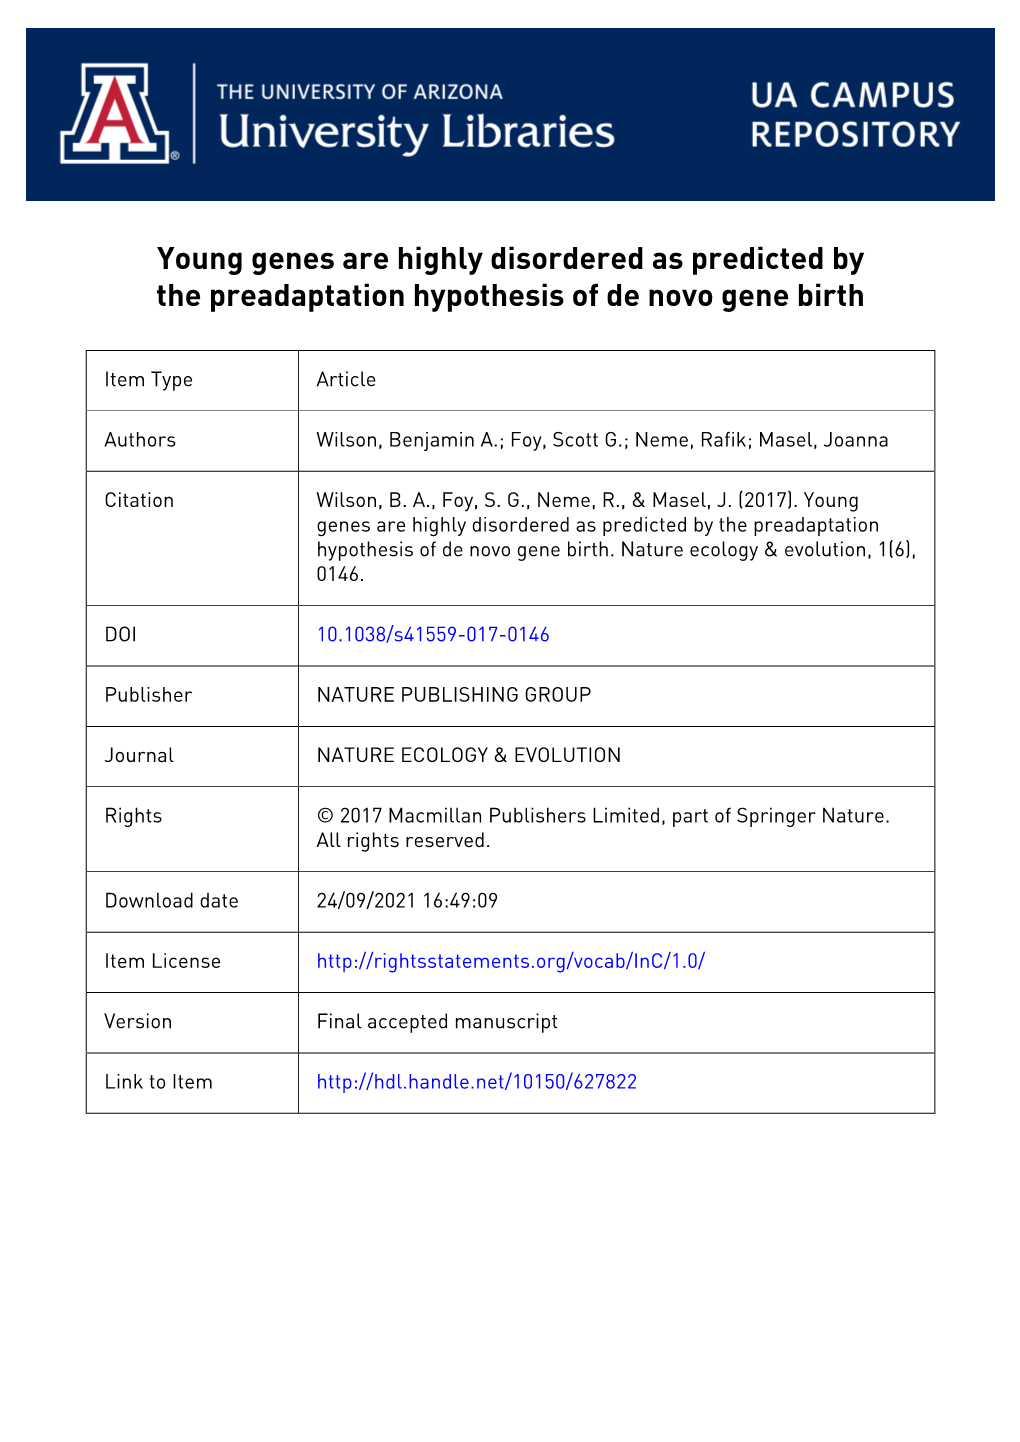 Young Genes Are Highly Disordered As Predicted by the Preadaptation Hypothesis of De Novo Gene Birth